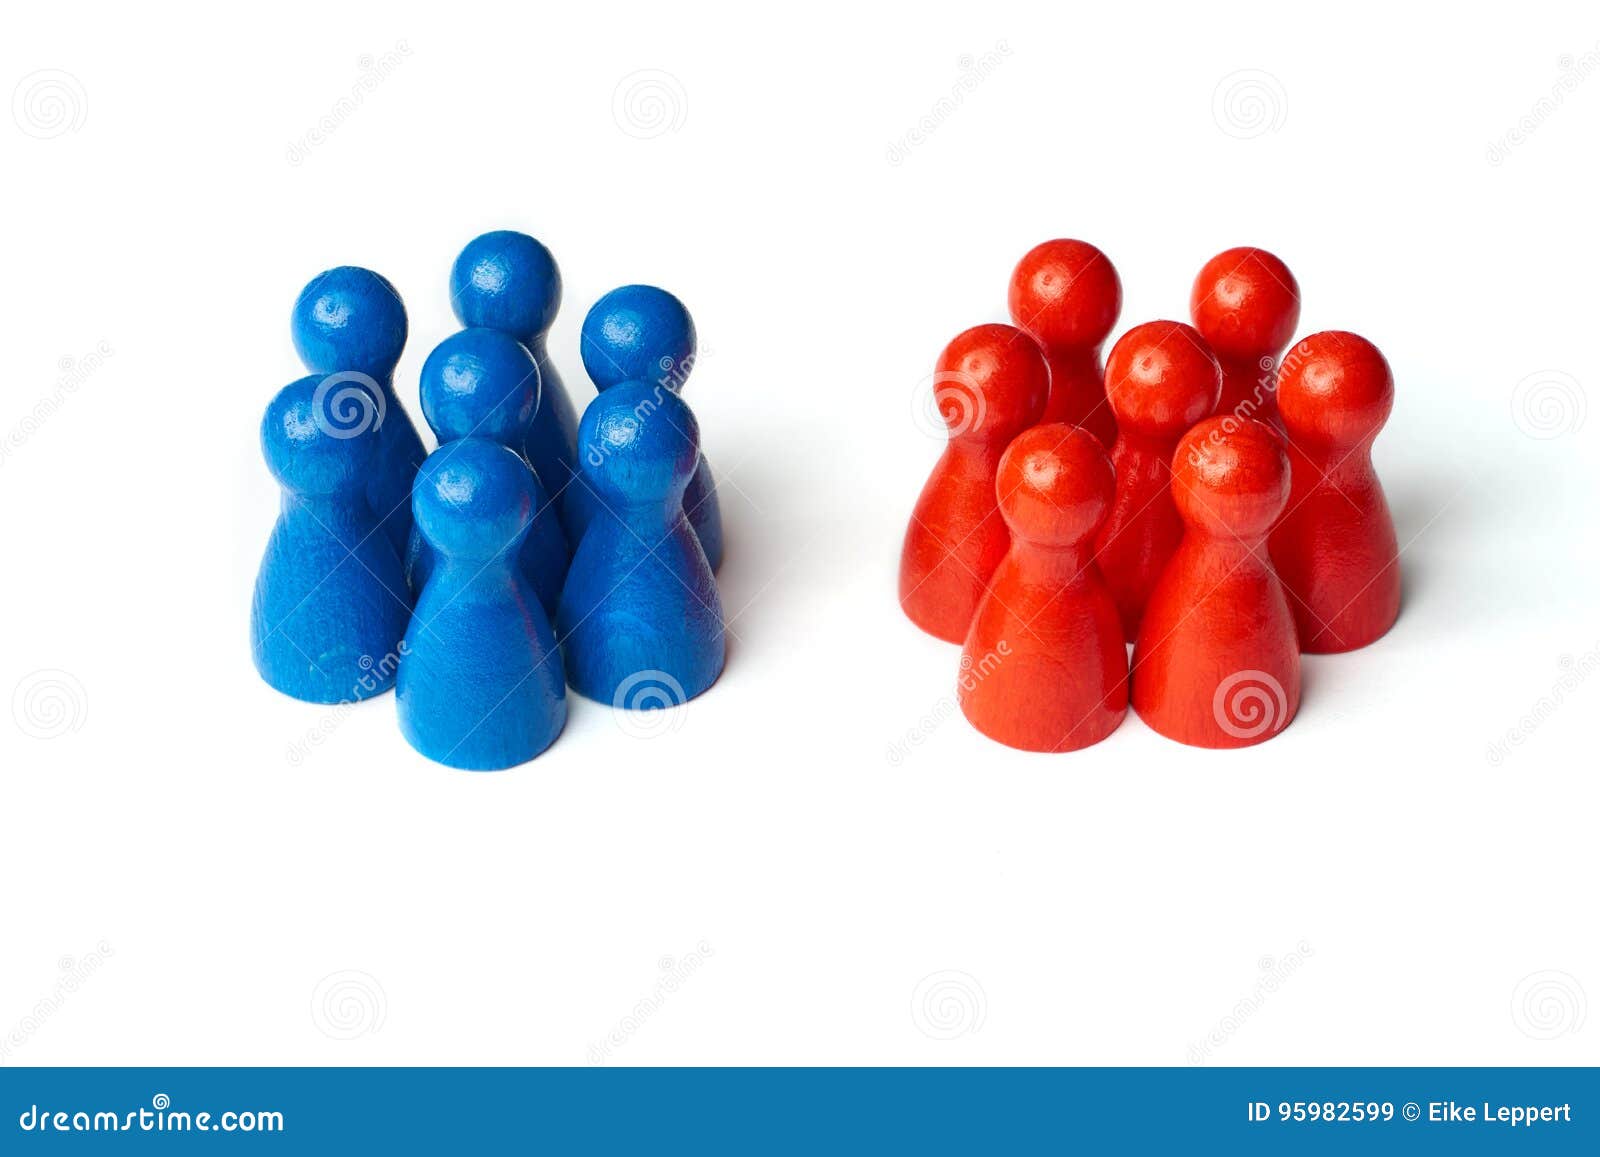 Game Figures As A Symbol For Two Groups Of People Concept For Teamwork Or Challange On White Background Stock Image Image Of Copyspace Relationship